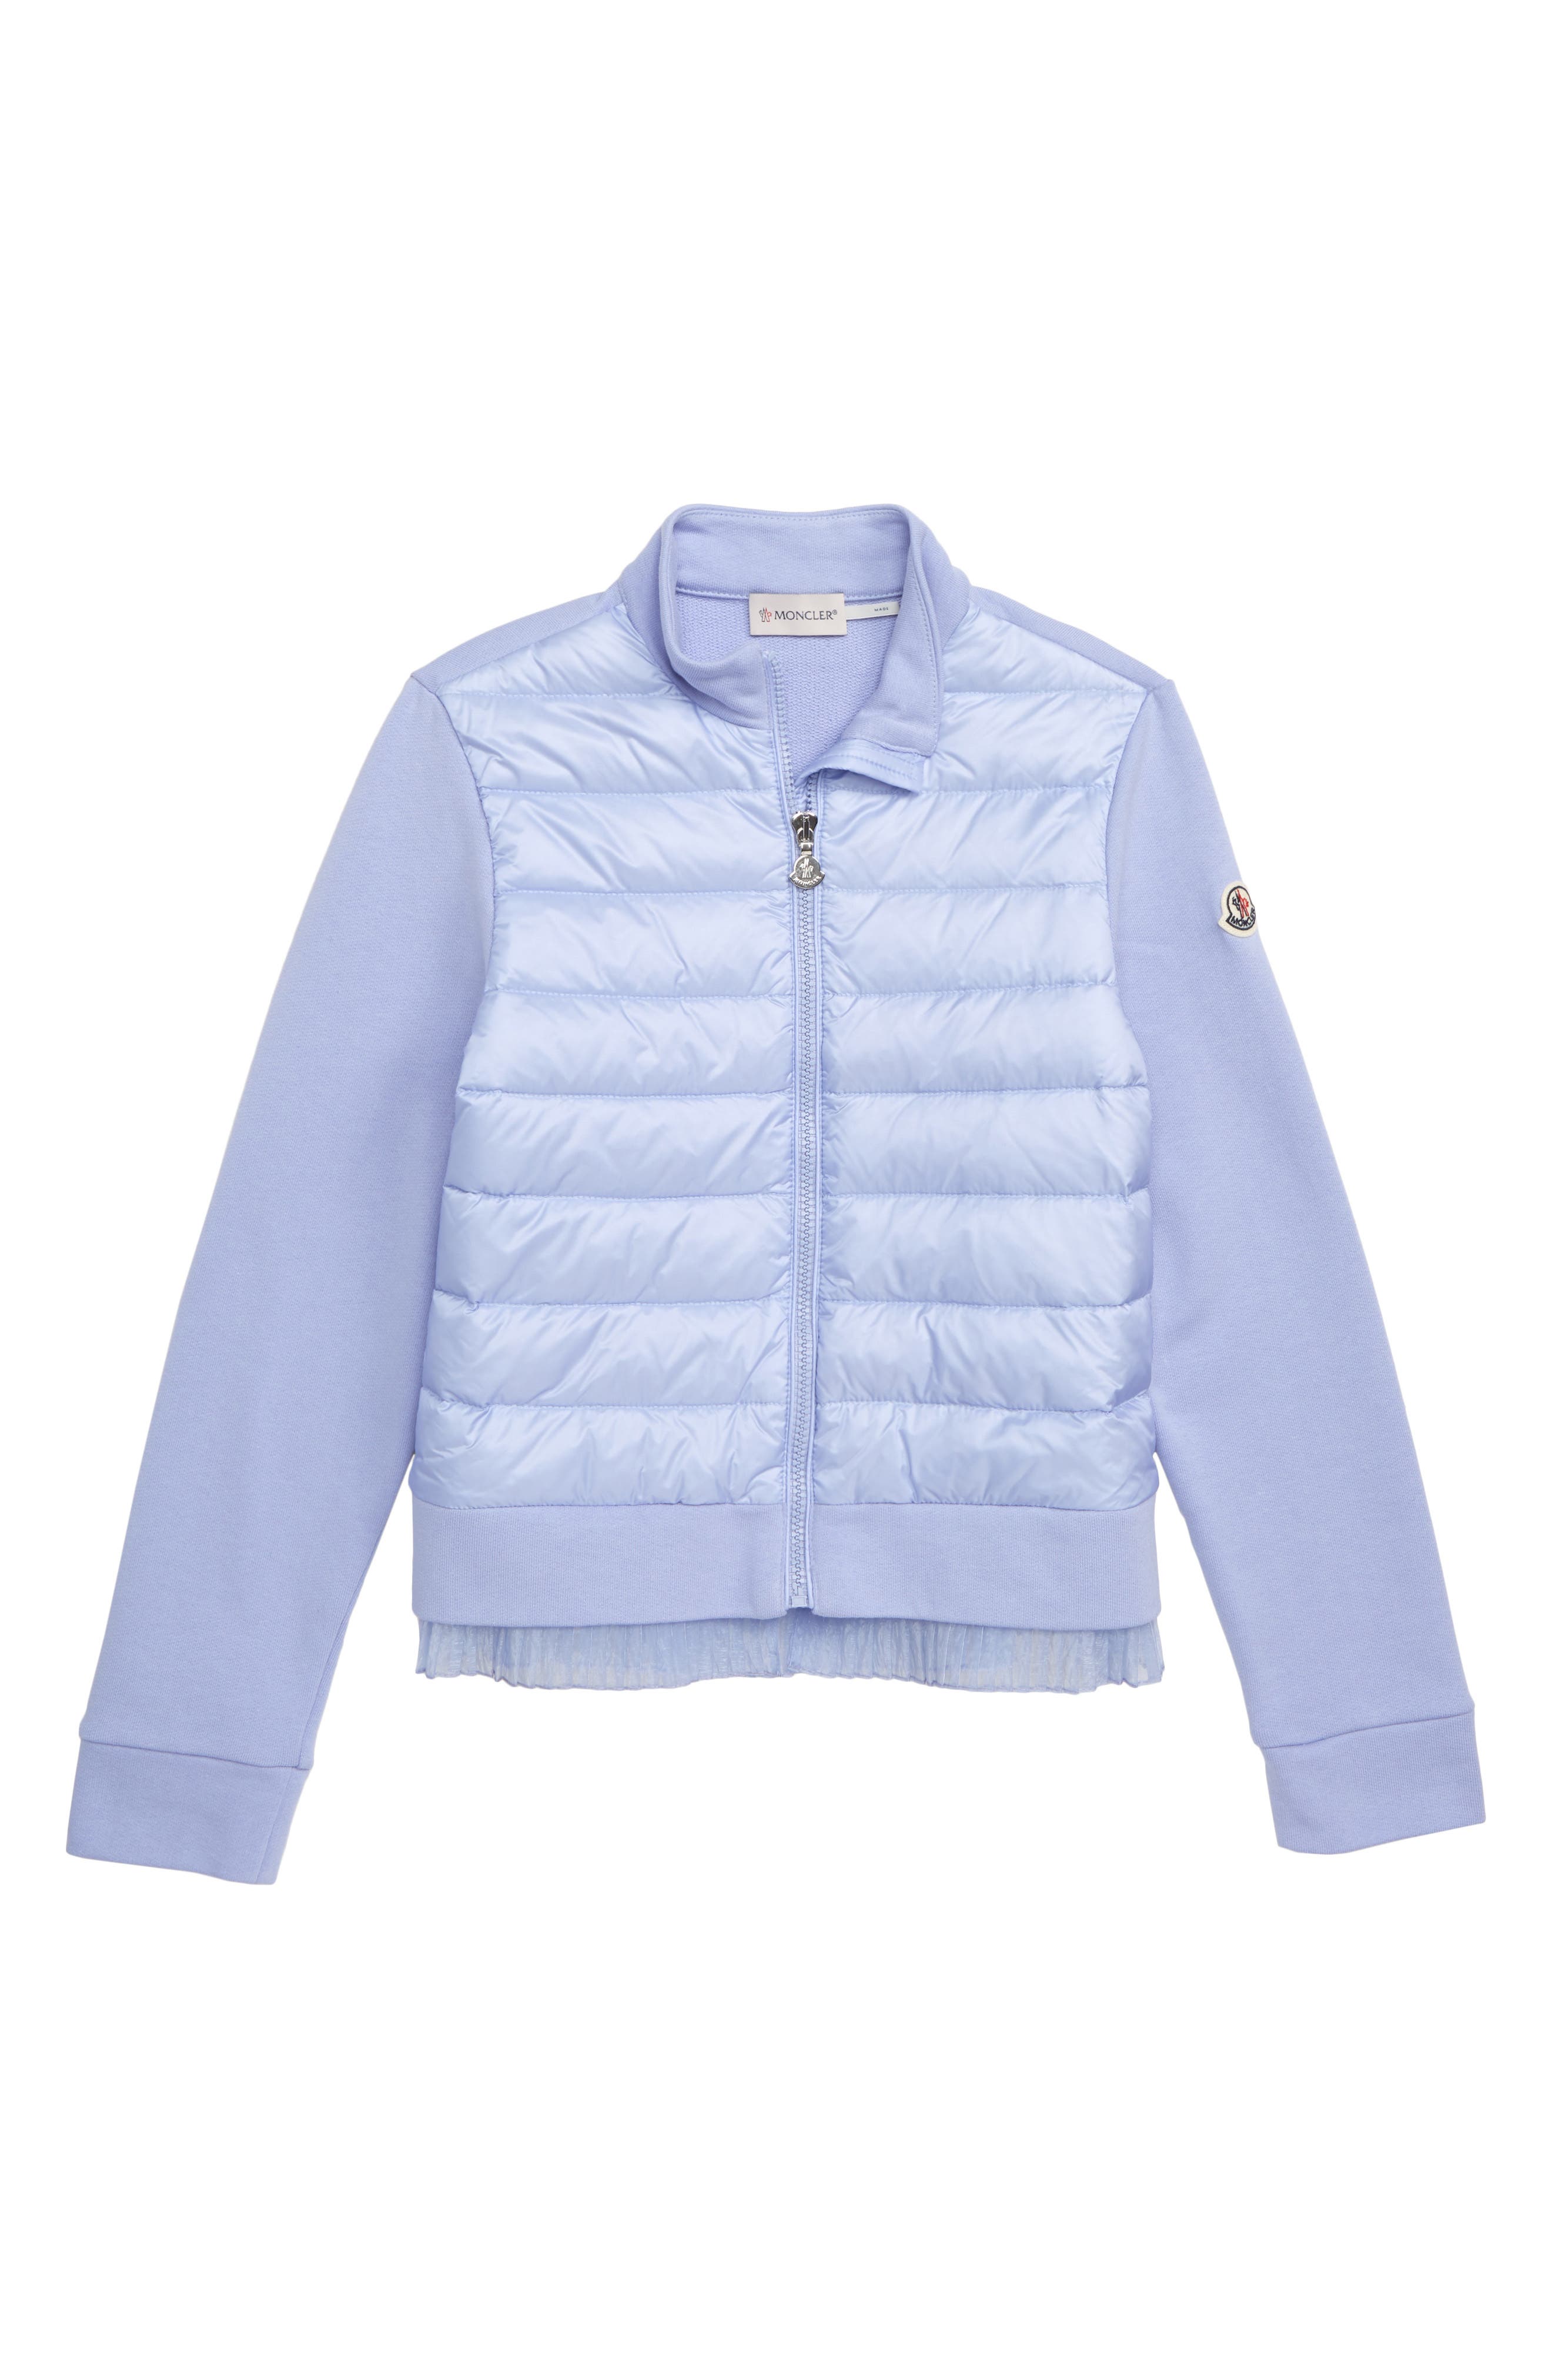 quilted down & knit cardigan moncler